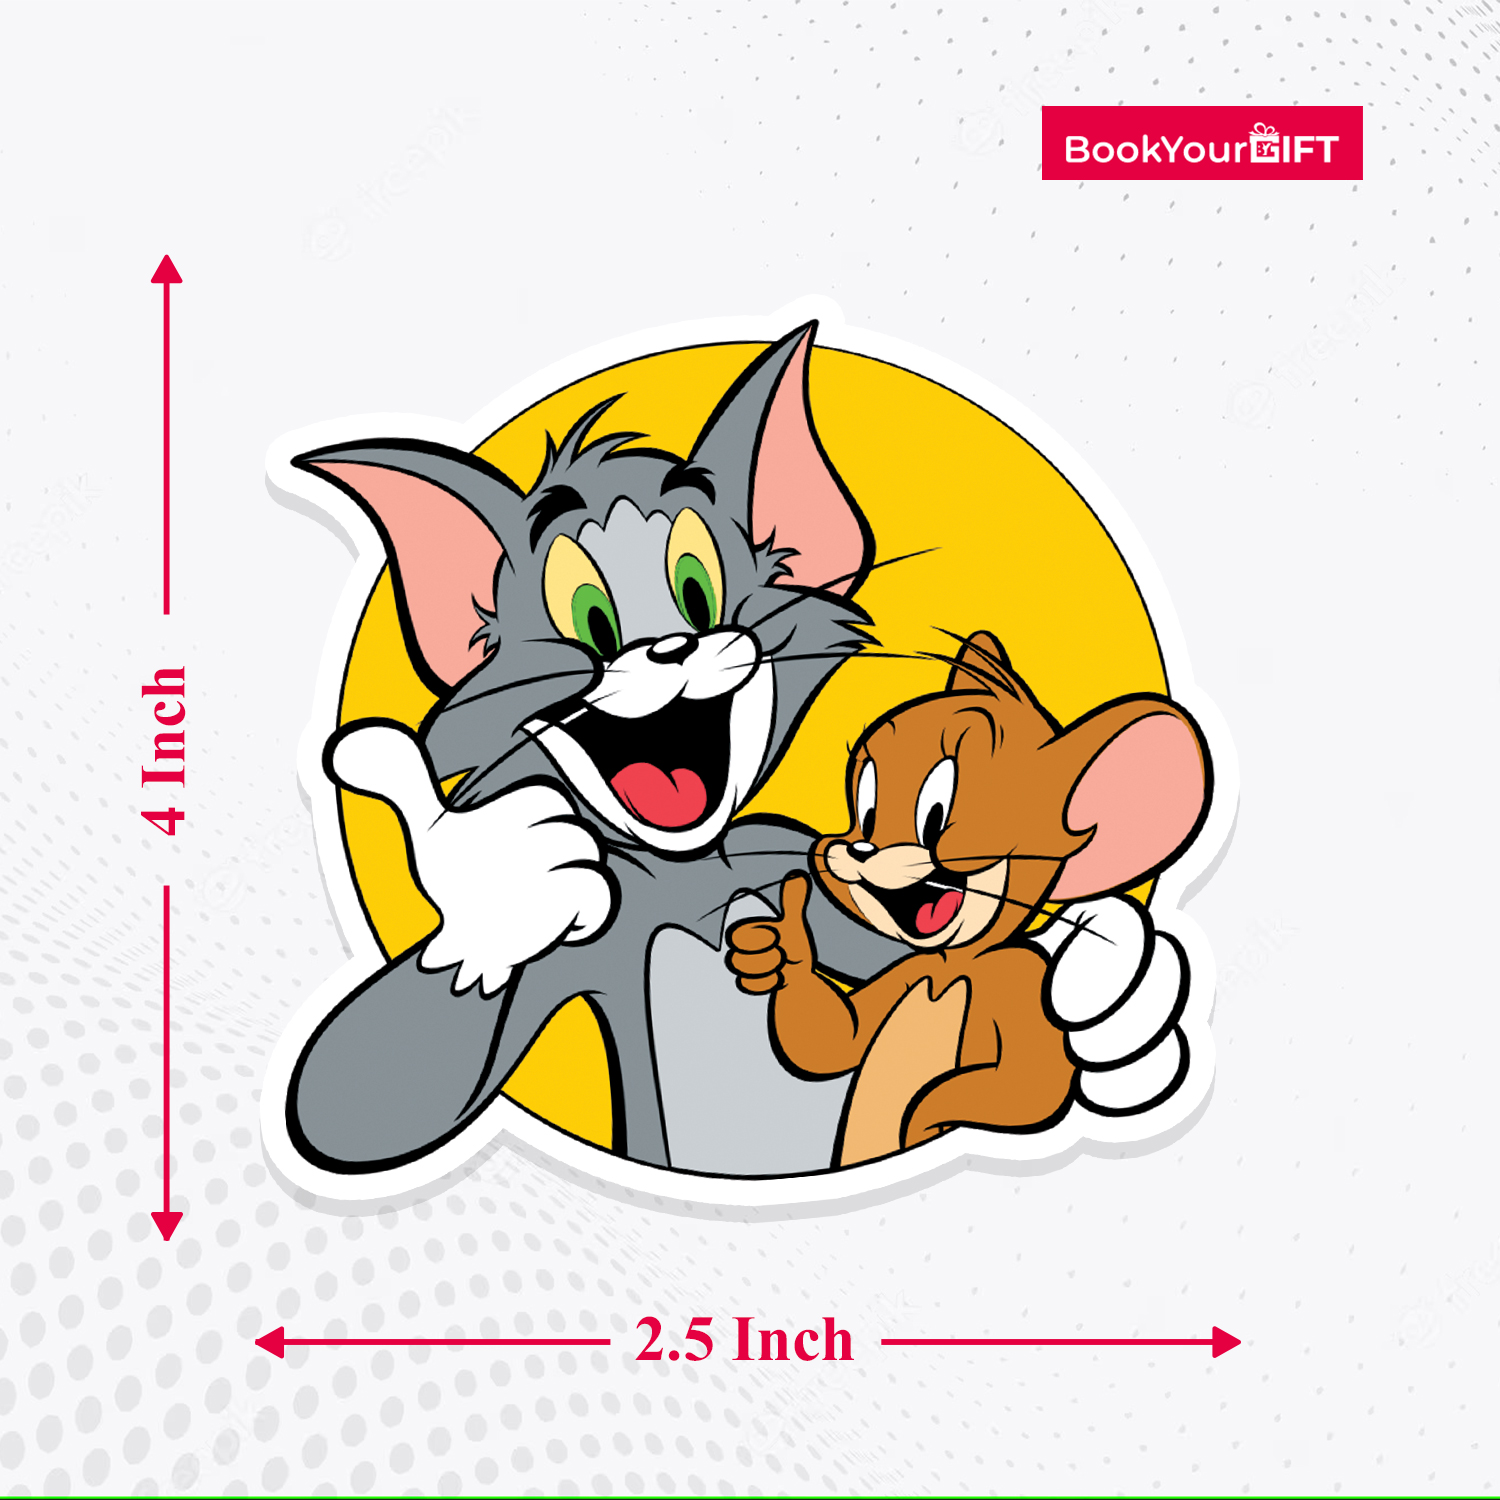 Adorable Tom and Jerry Fridge Magnet - Perfect for Fans and Collectors!